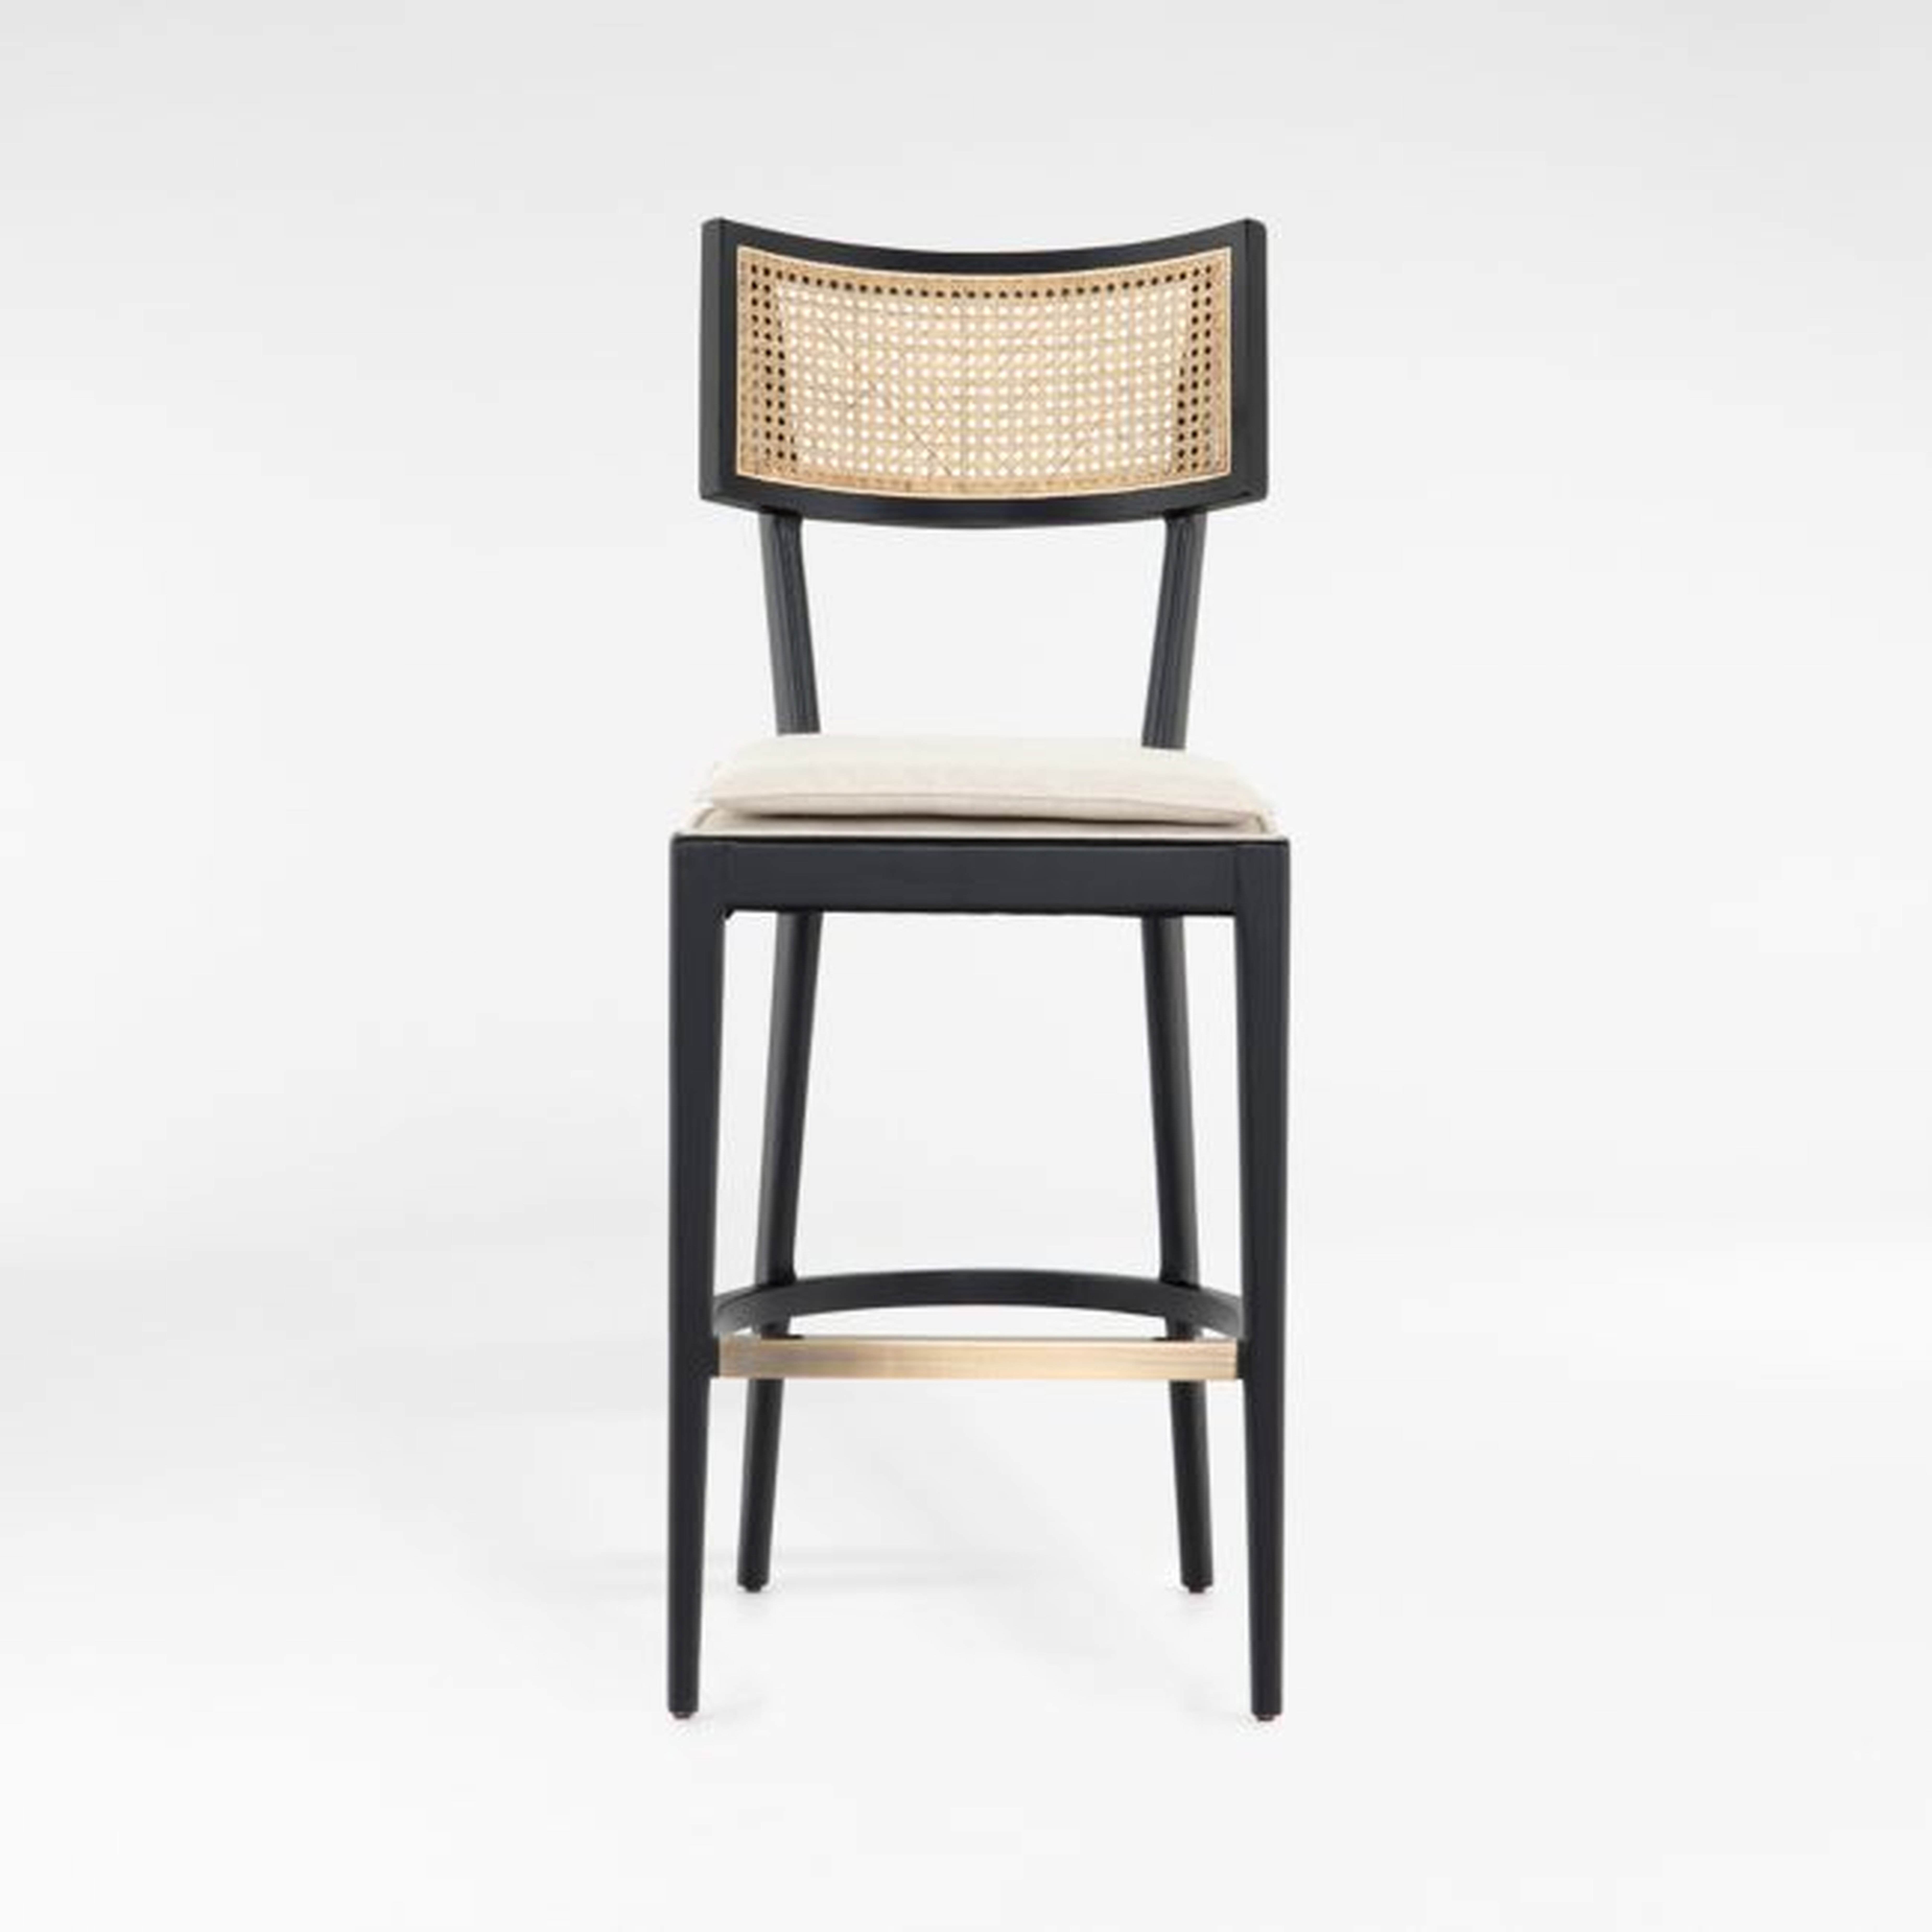 Libby Black Cane Counter Stool - Crate and Barrel